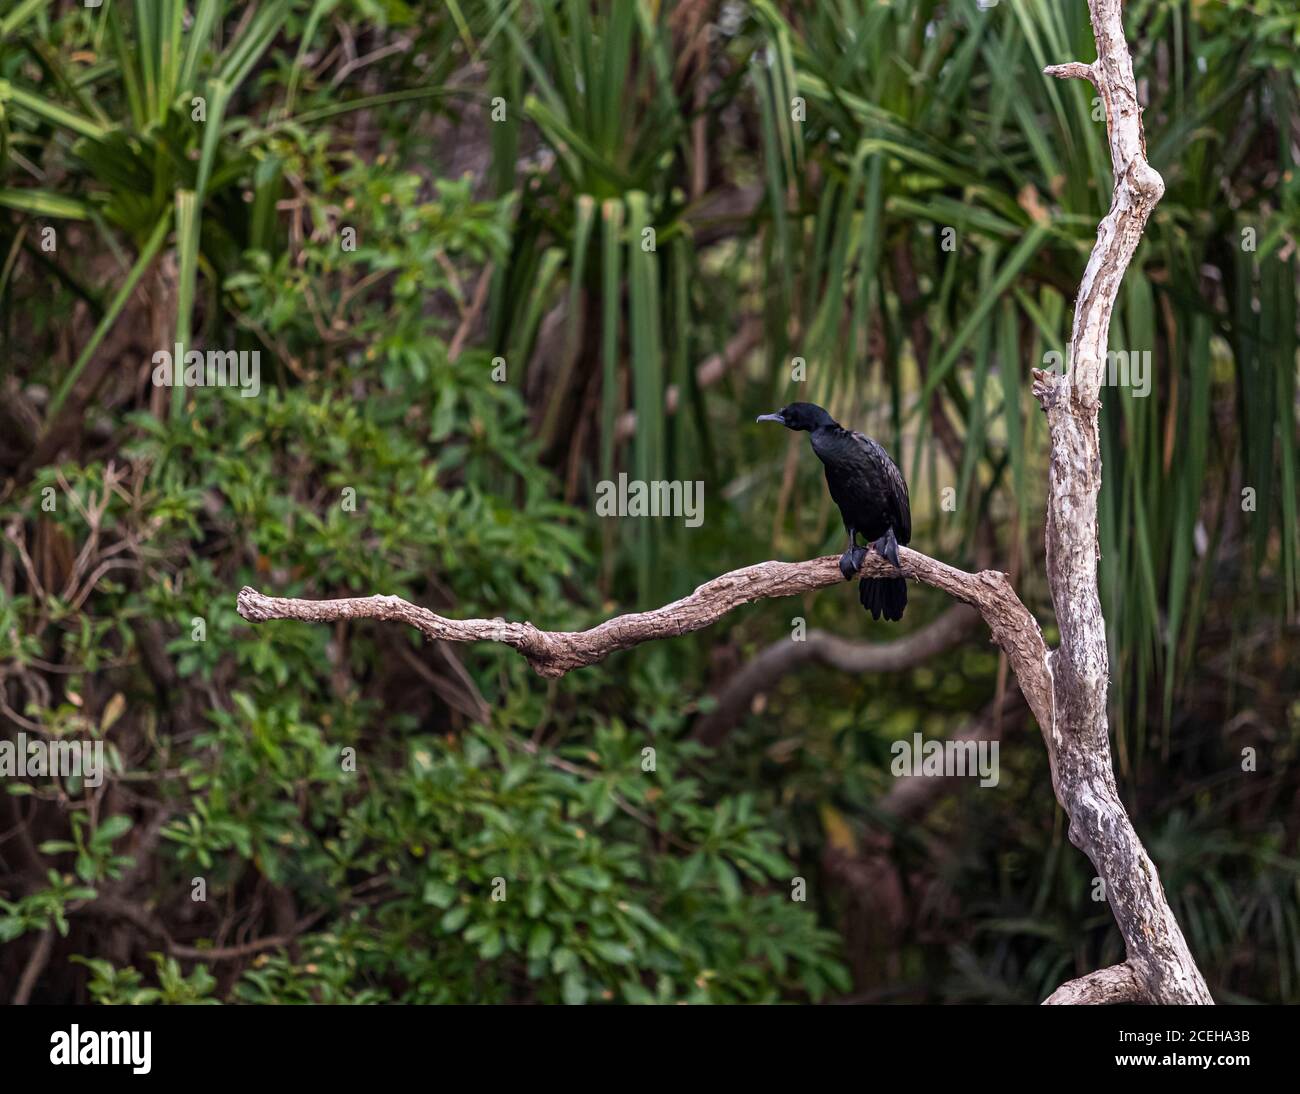 Birdwatching at the Top End of Australia Stock Photo